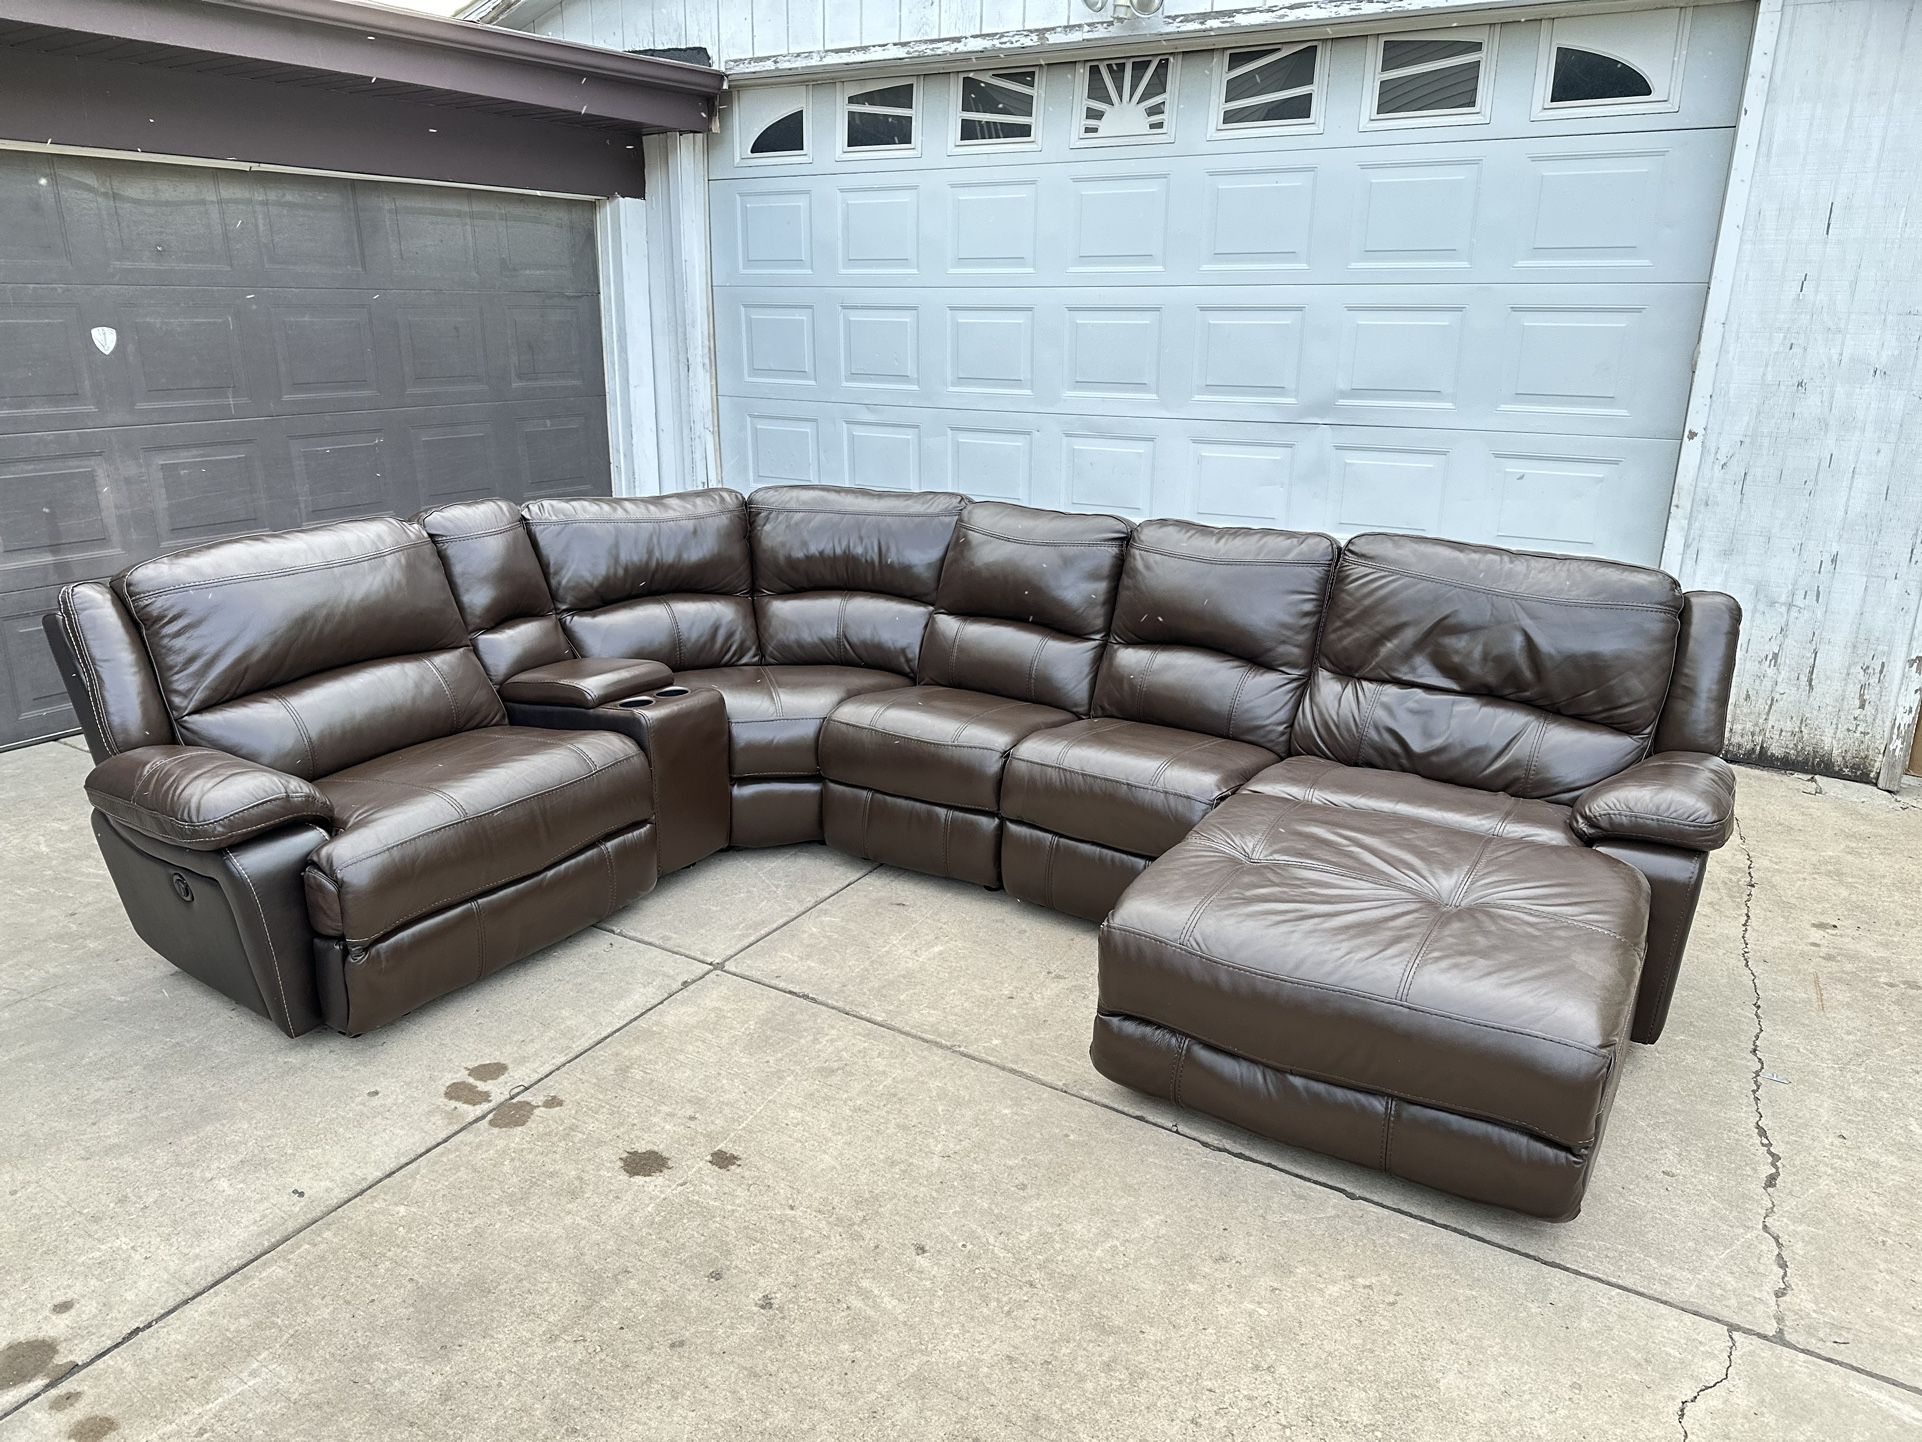 FREE DELIVERY 🚚  Ashley furniture Real Leather brown Couch, sofa sectional recliner  